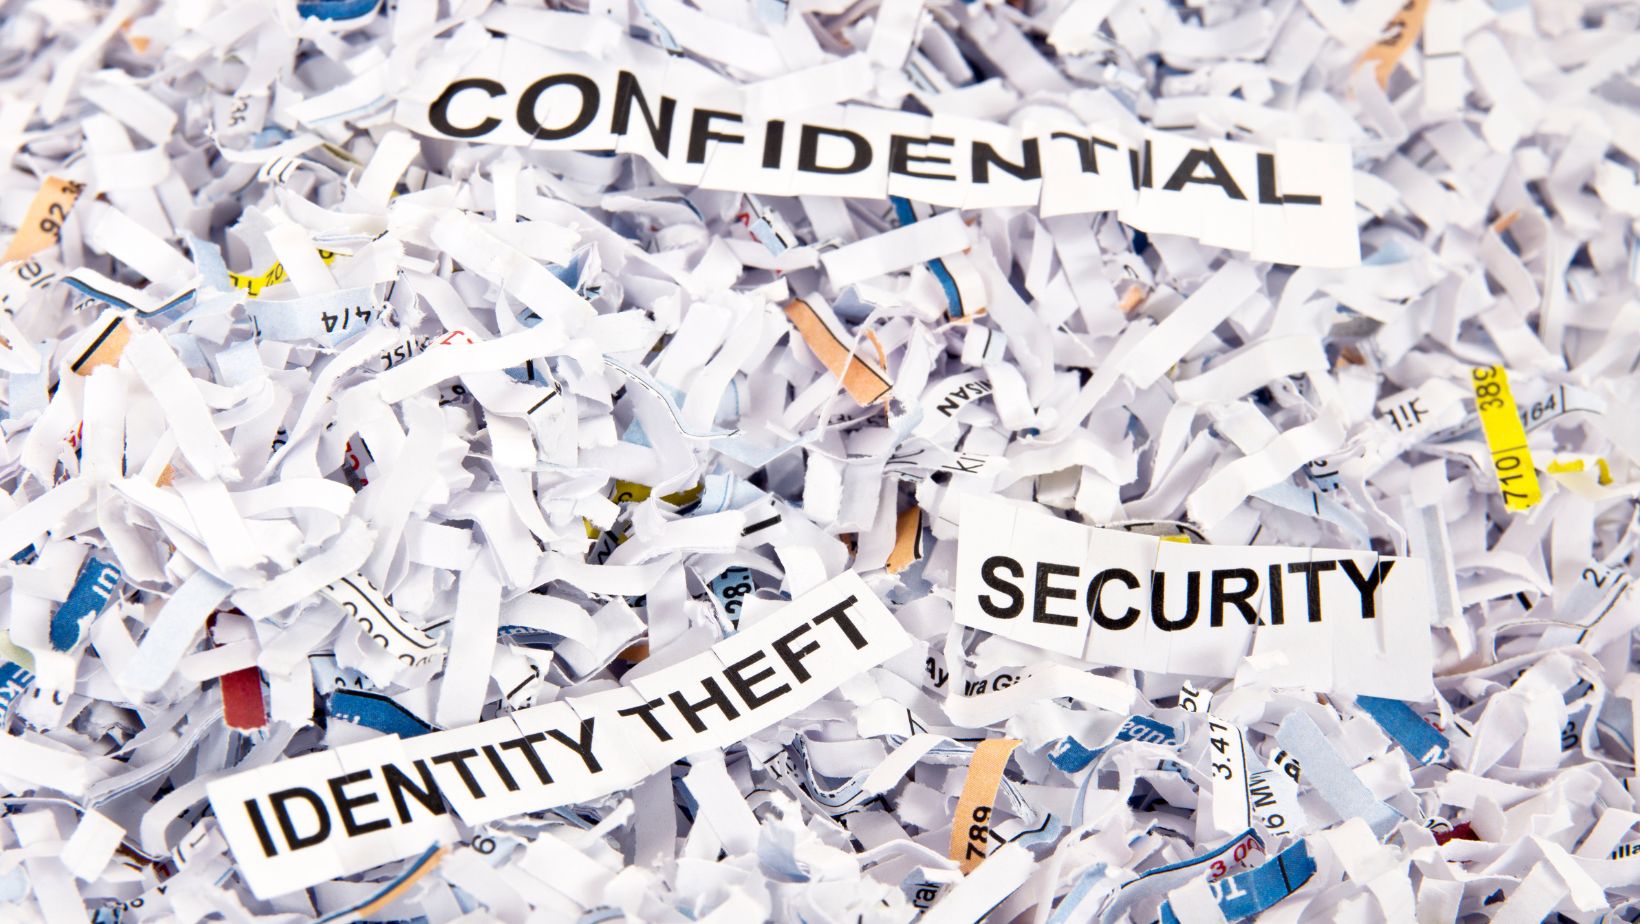 a pile of shredded paper with the words "confidential, identity theft and security"